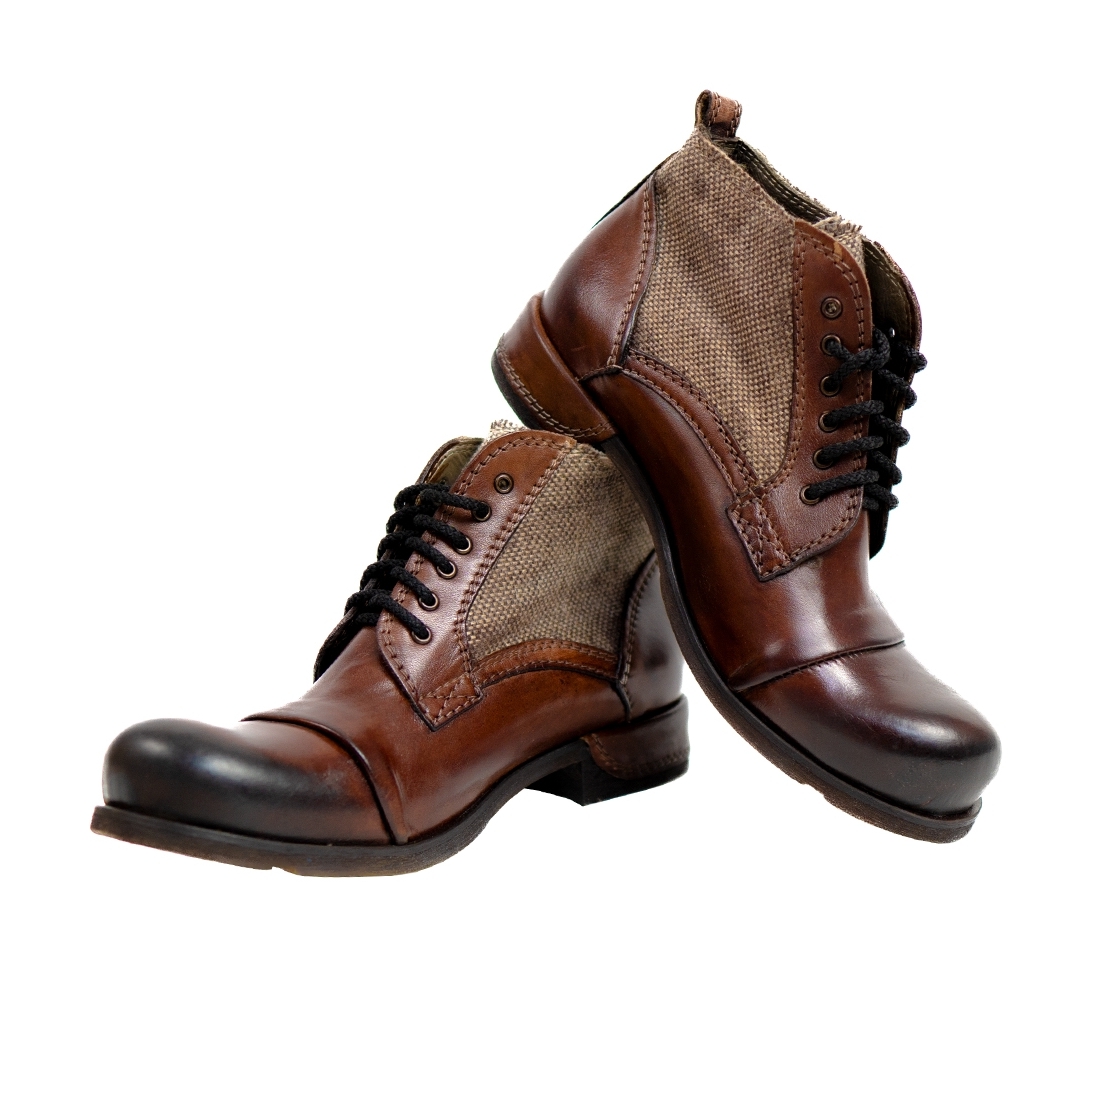 Modello Pabirreto - Colorful Lace-Up Oxfords Dress Shoes - Cowhide ...